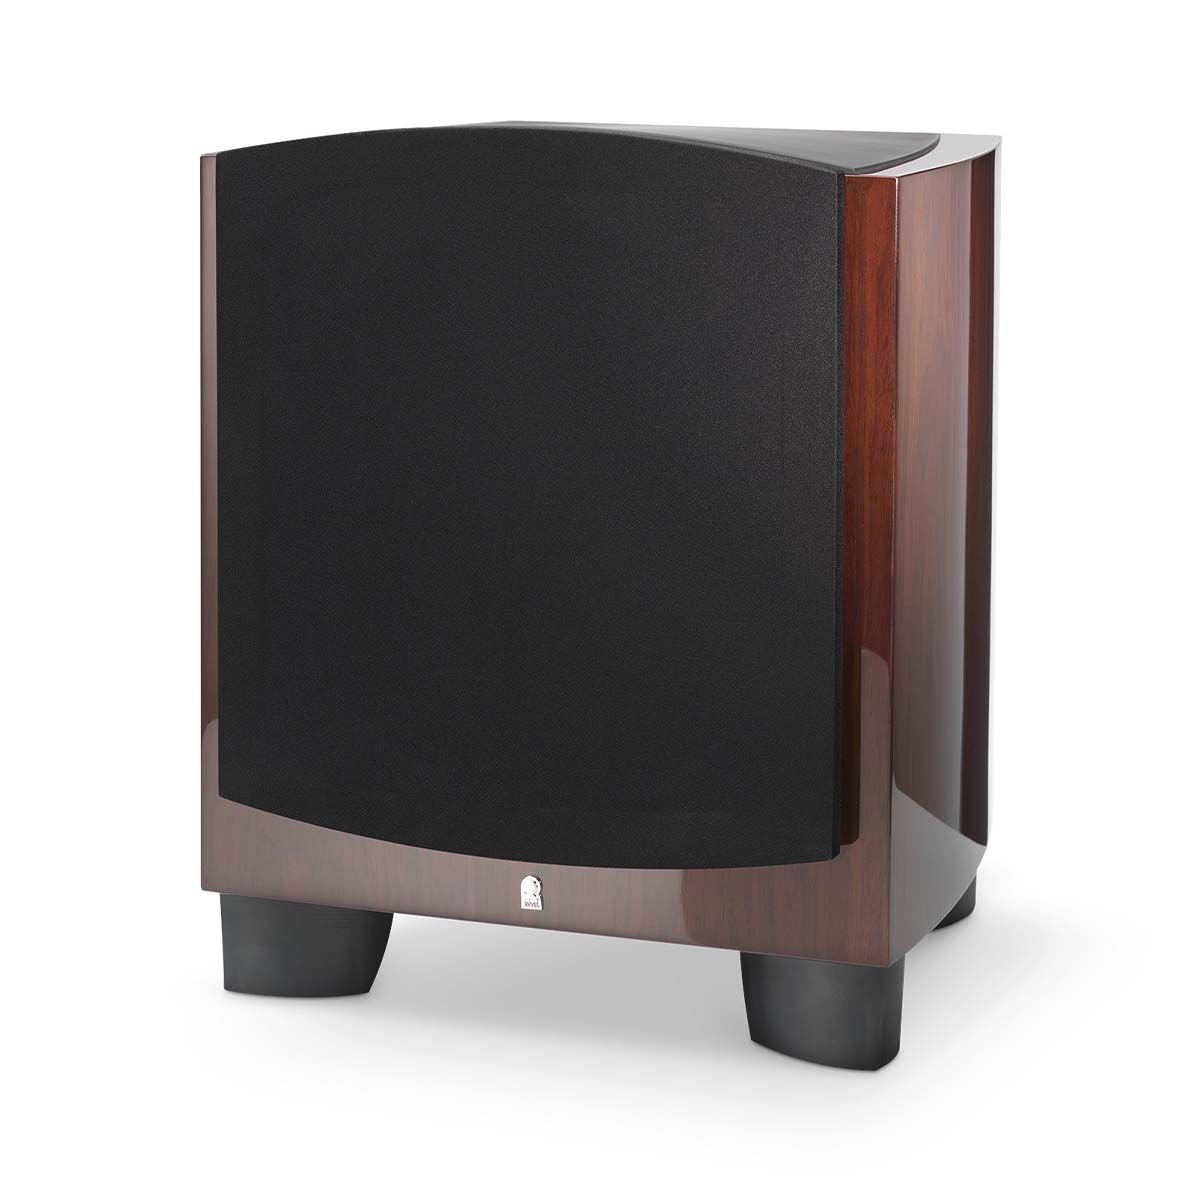 Revel B110v2 10” 1000W Powered Subwoofer - single walnut with grille - angled front view